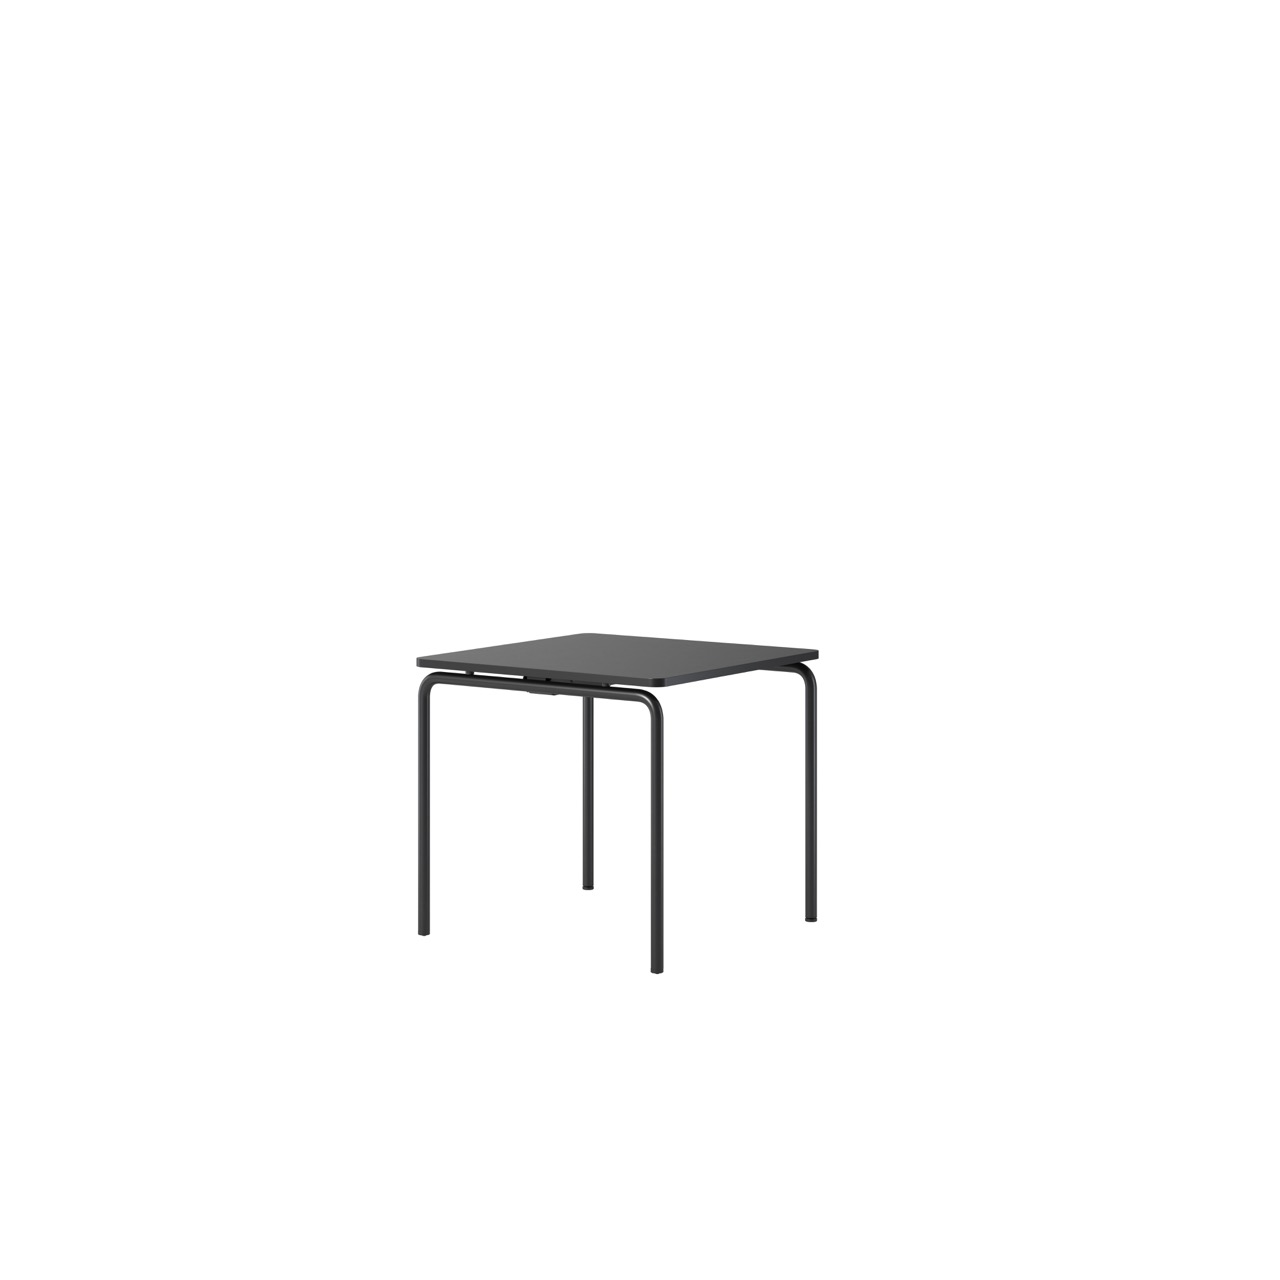 OCEE&FOUR - Tables - FourReal 74 - 80 x 80 - Straight - Packshot Image 3 Large